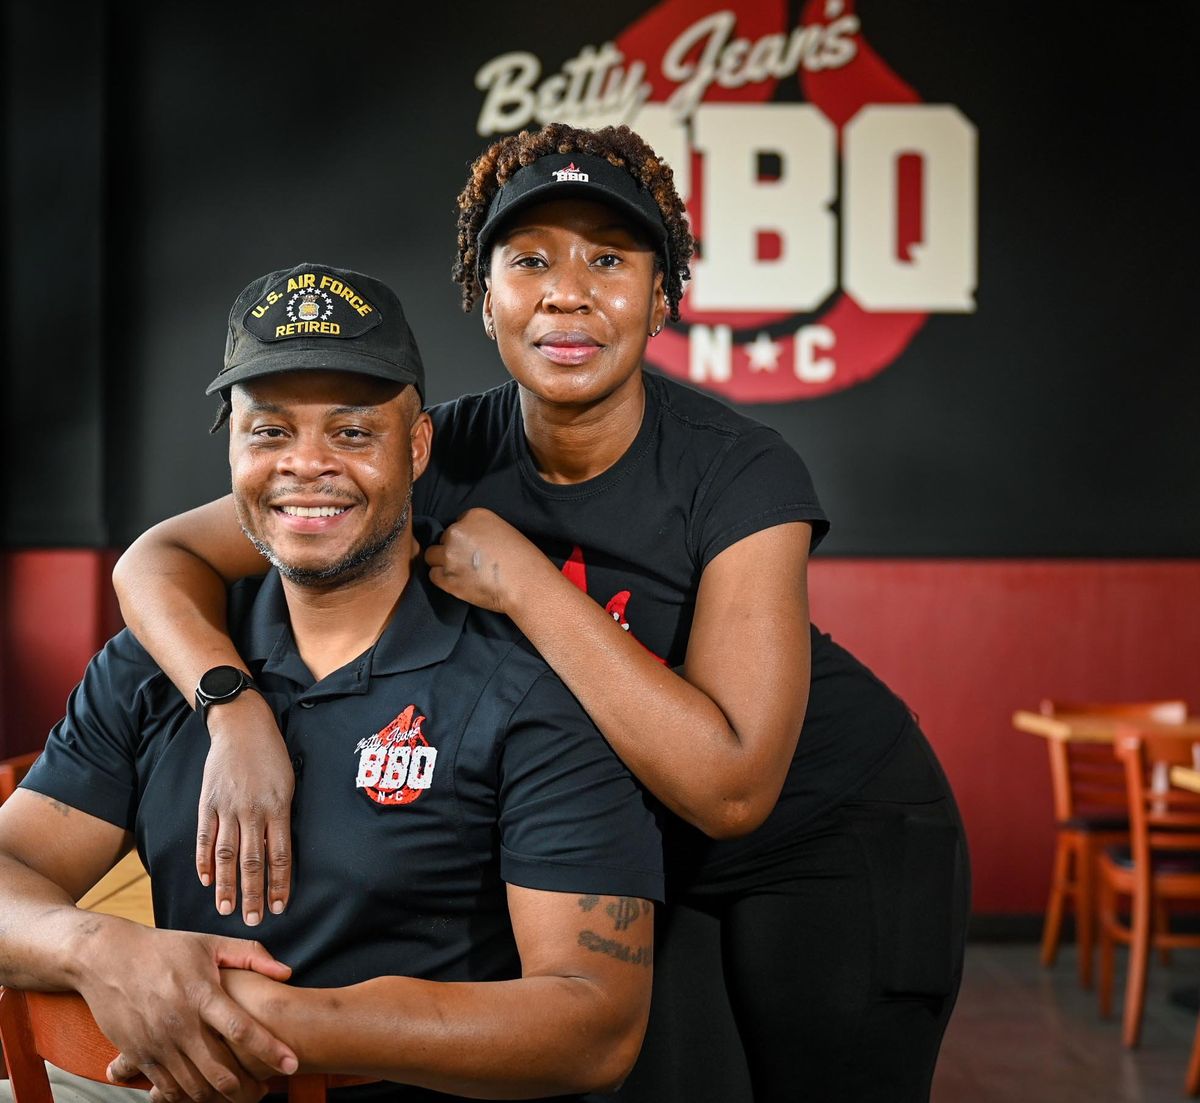 Omar and Dee Jones, of Betty Jean’s BBQ, specialize in North Carolina-style barbecue – pulled pork, ribs, chicken, brisket, sides and more. They are located at 2926 E. 29th Ave. in Spokane.  (DAN PELLE/THE SPOKESMAN-REVIEW)